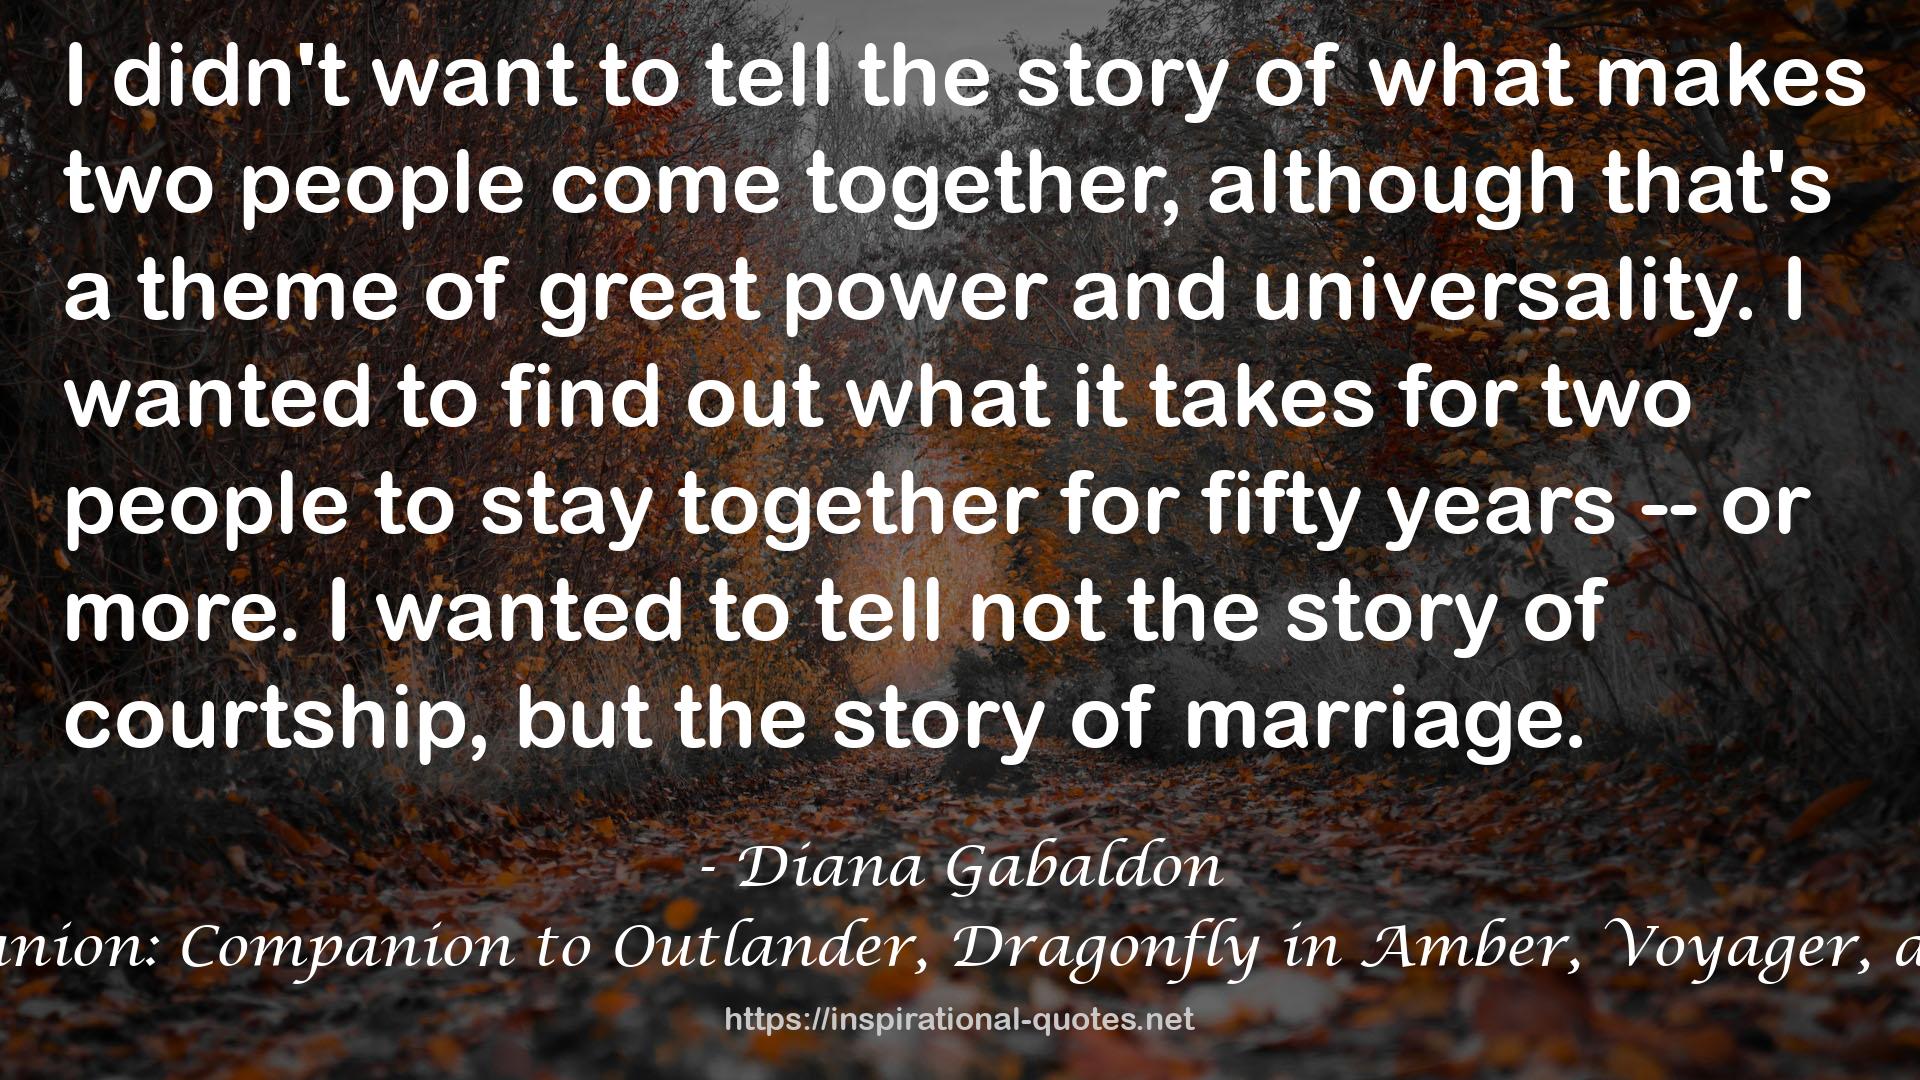 The Outlandish Companion: Companion to Outlander, Dragonfly in Amber, Voyager, and Drums of Autumn QUOTES